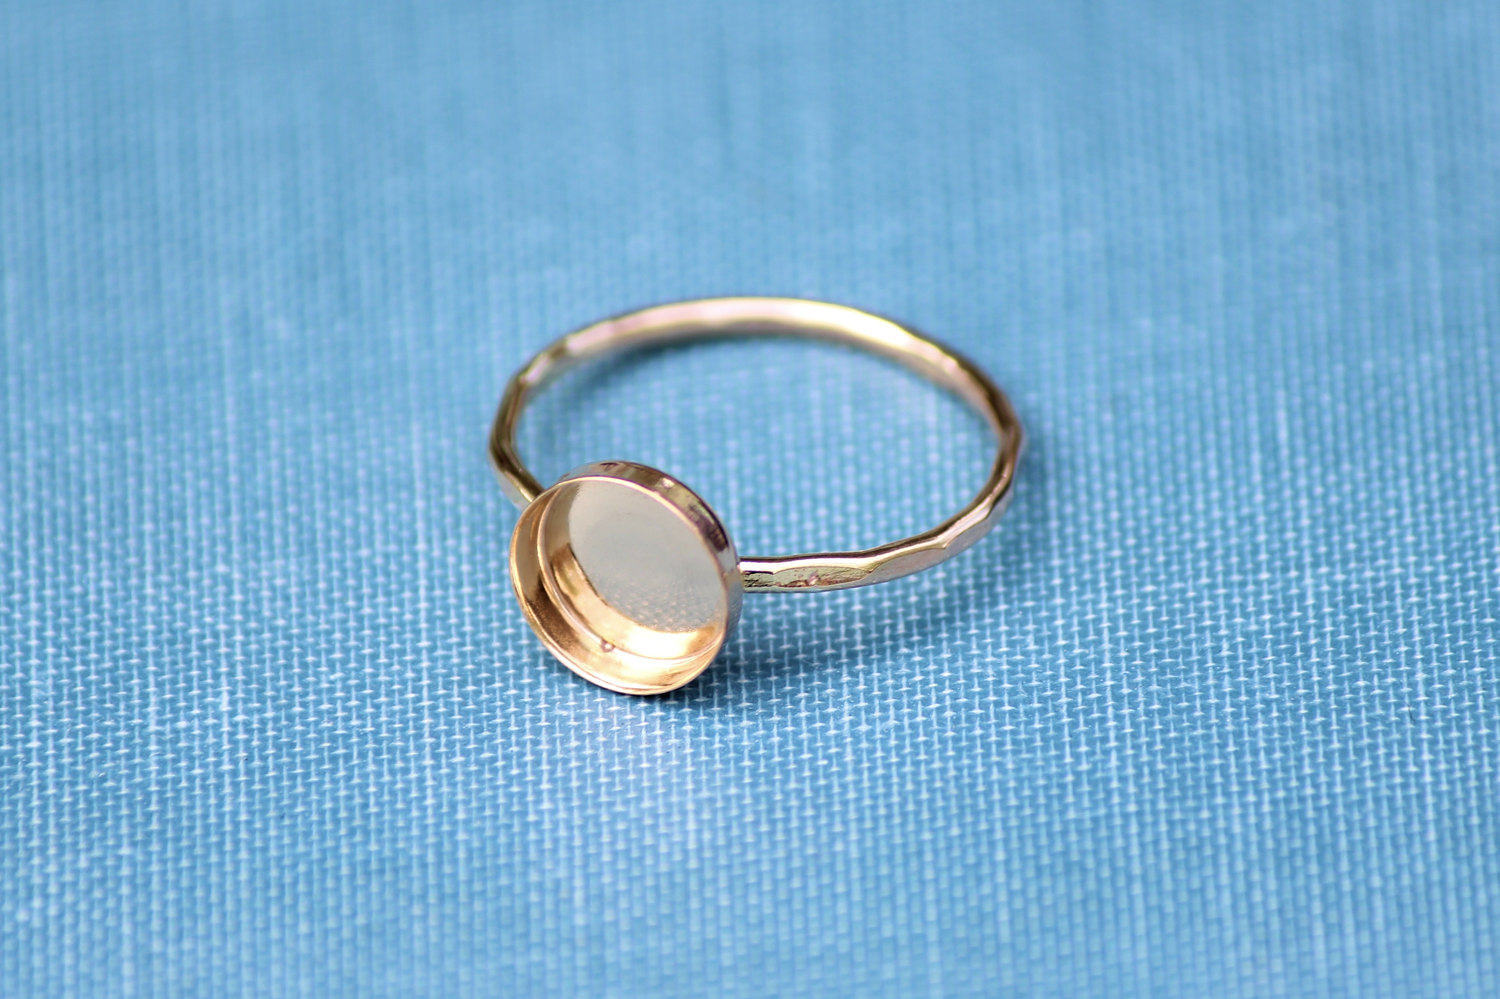 Gold 10mm Bezel Cup Ring blank, Round Cabochon, Cab Resin Breast Milk, DIY jewelry supplies, build your ring, wholesale jewelry, diy ring